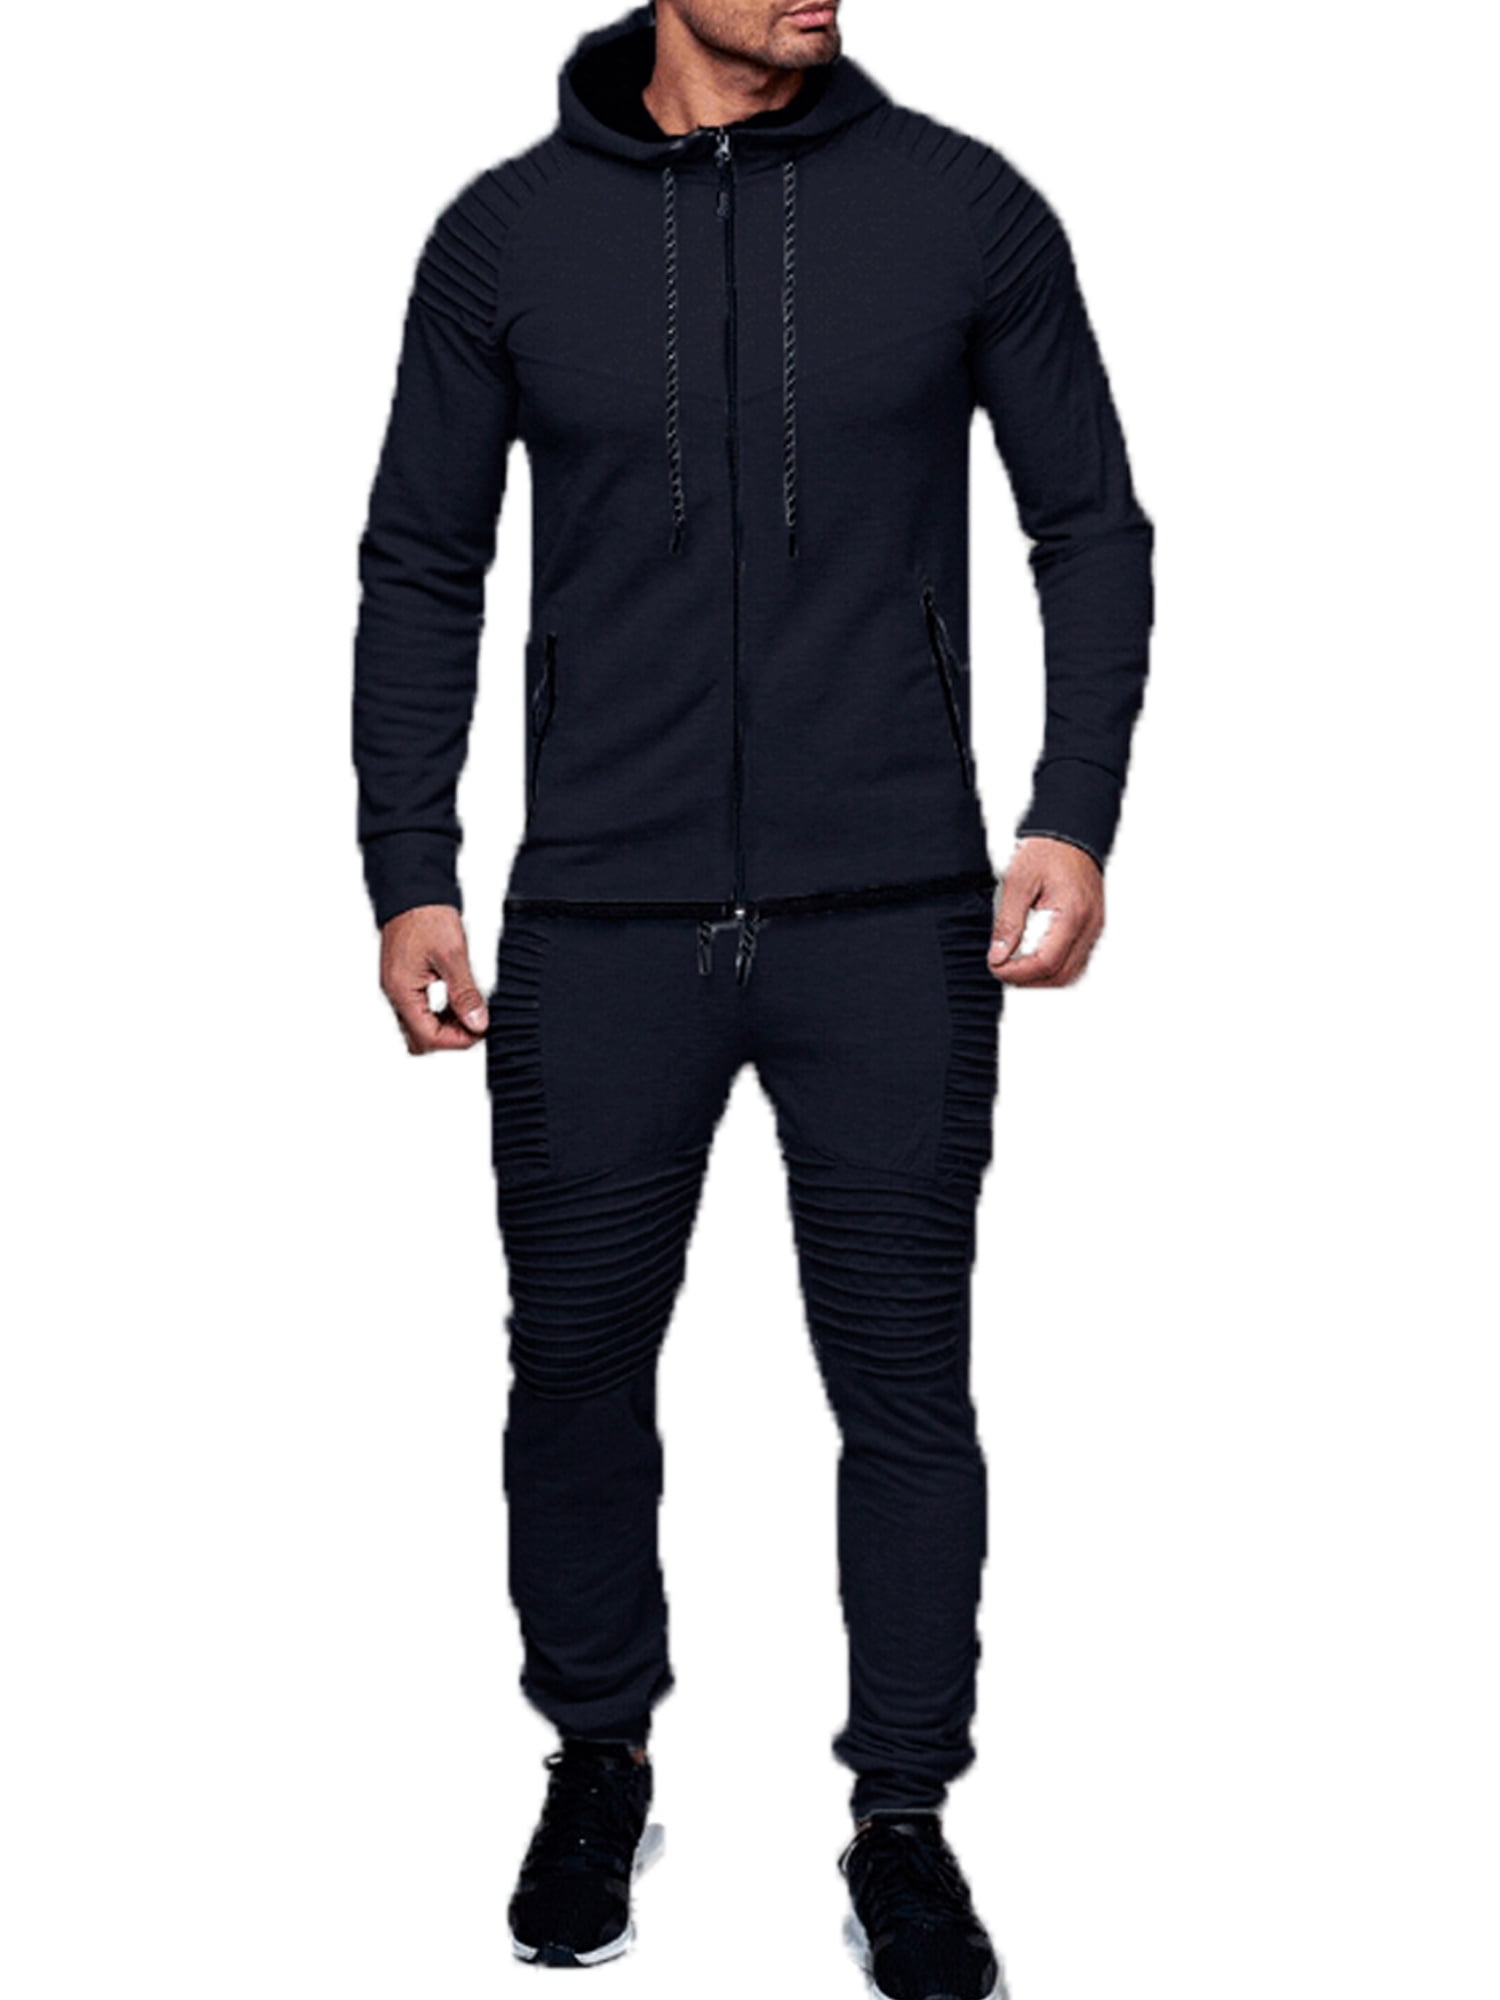 Mens Joggers Tracksuit Set Slim Fit Full Sleeve Polyester Zipper Up Hoodie Tops and Bottom Men Tracksuit Sets Urban Athletic 